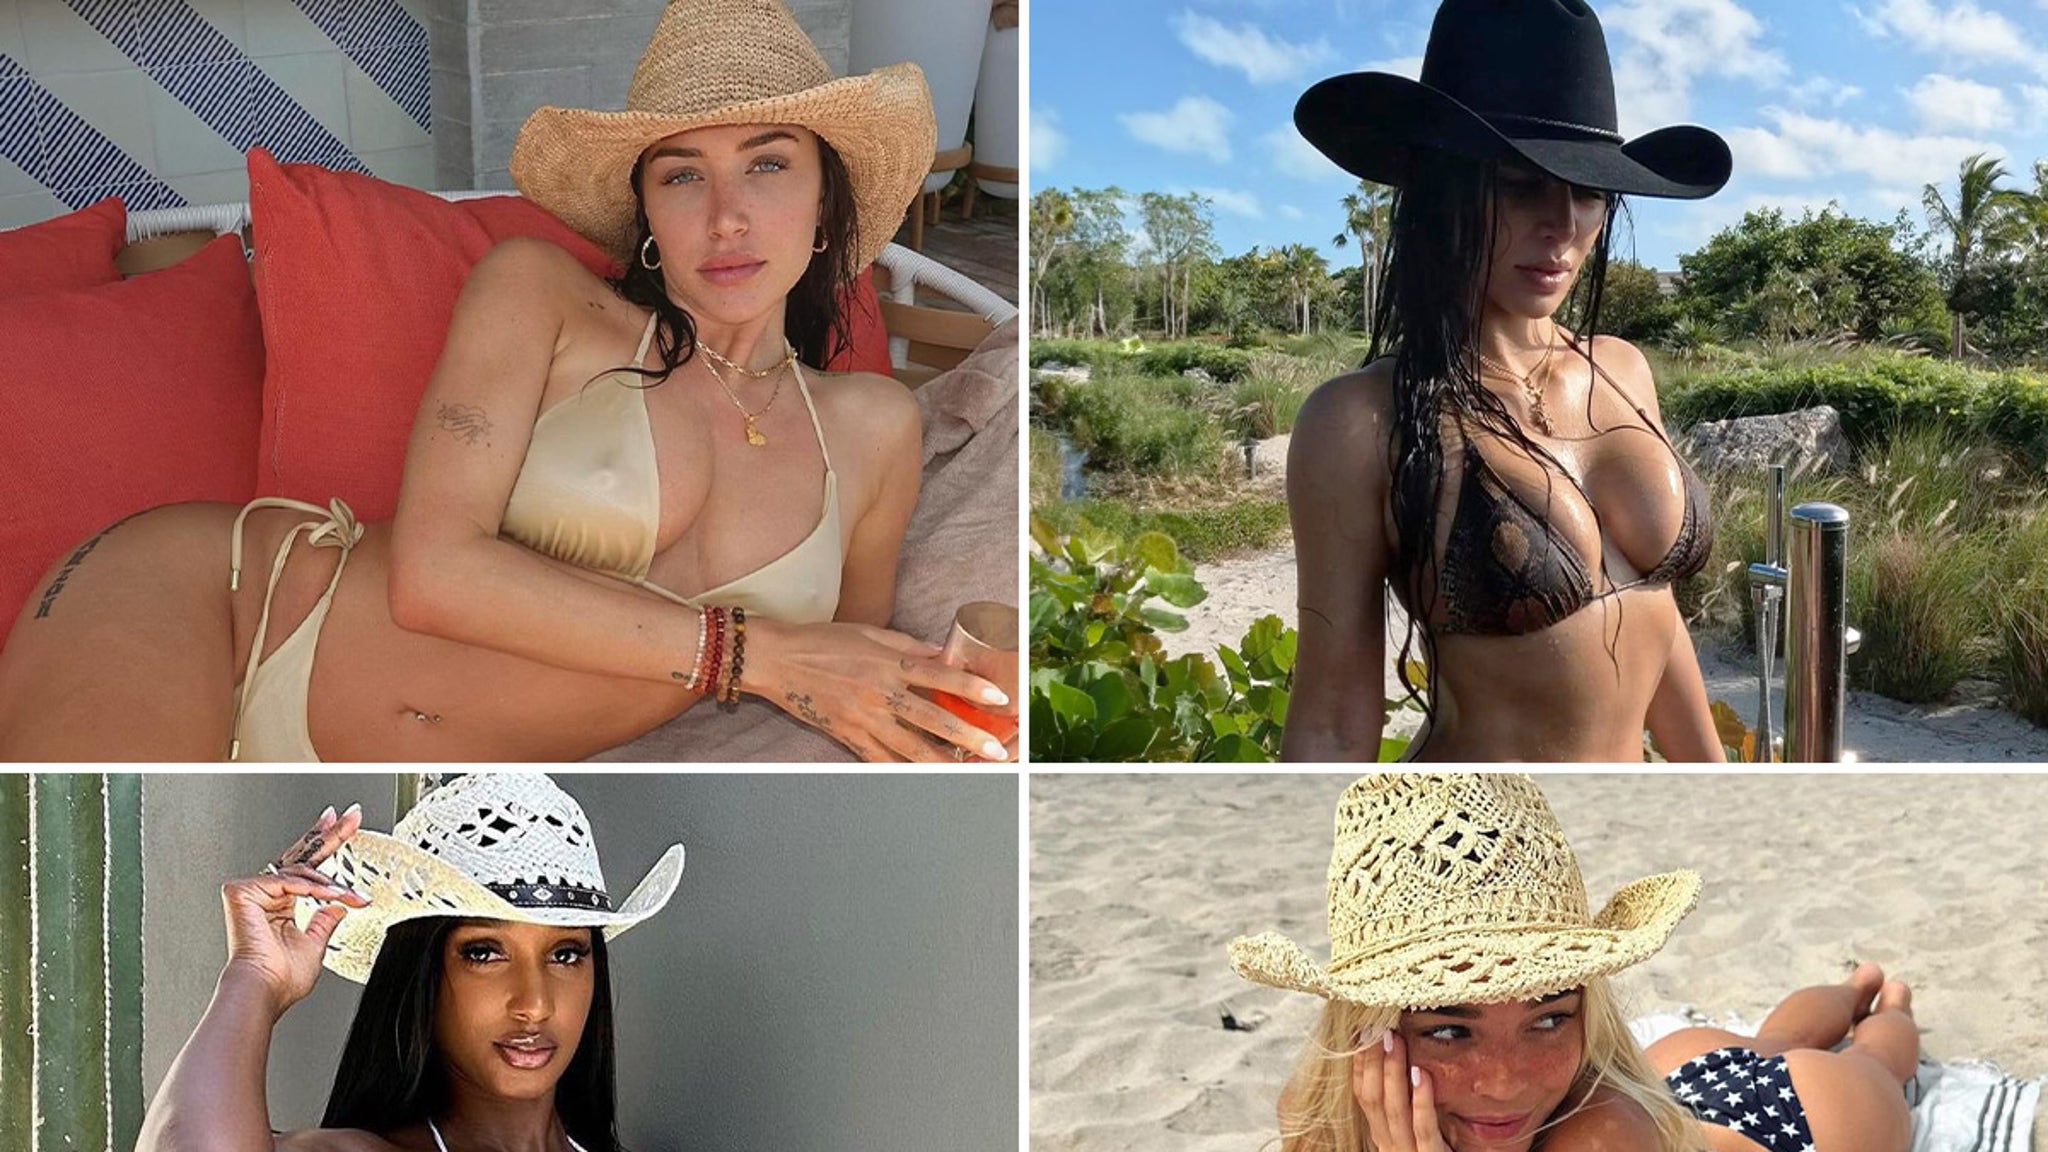 Bikini Babes In Cowboy Hats ... Well Hay There Hollywood Hotties!